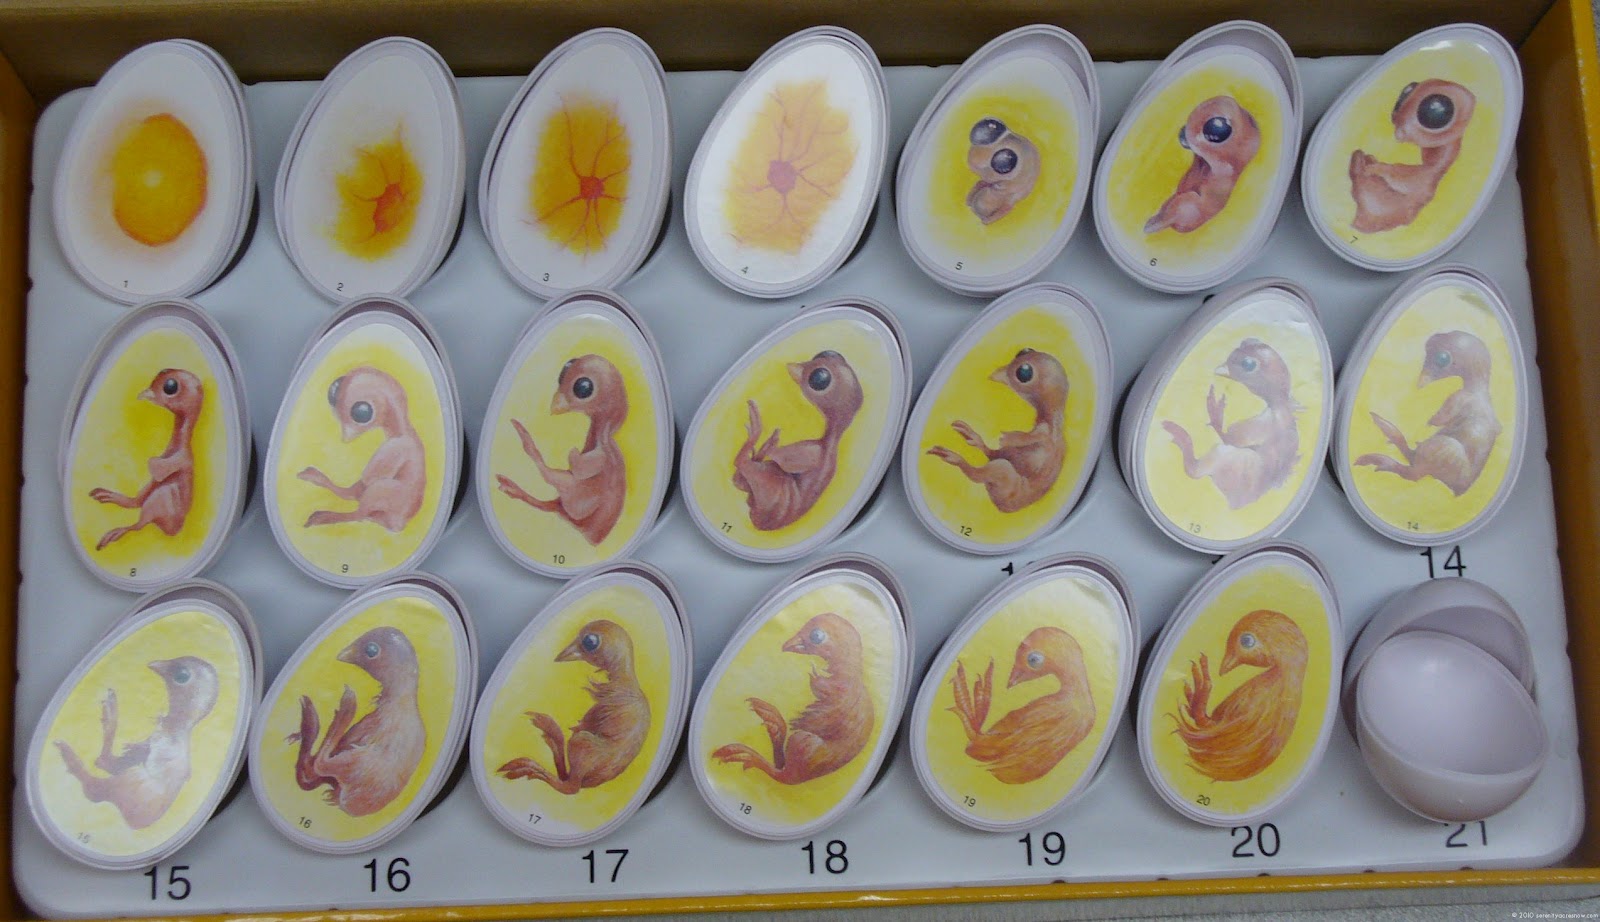 Baby Chick Development In Egg: A Journey Into Life